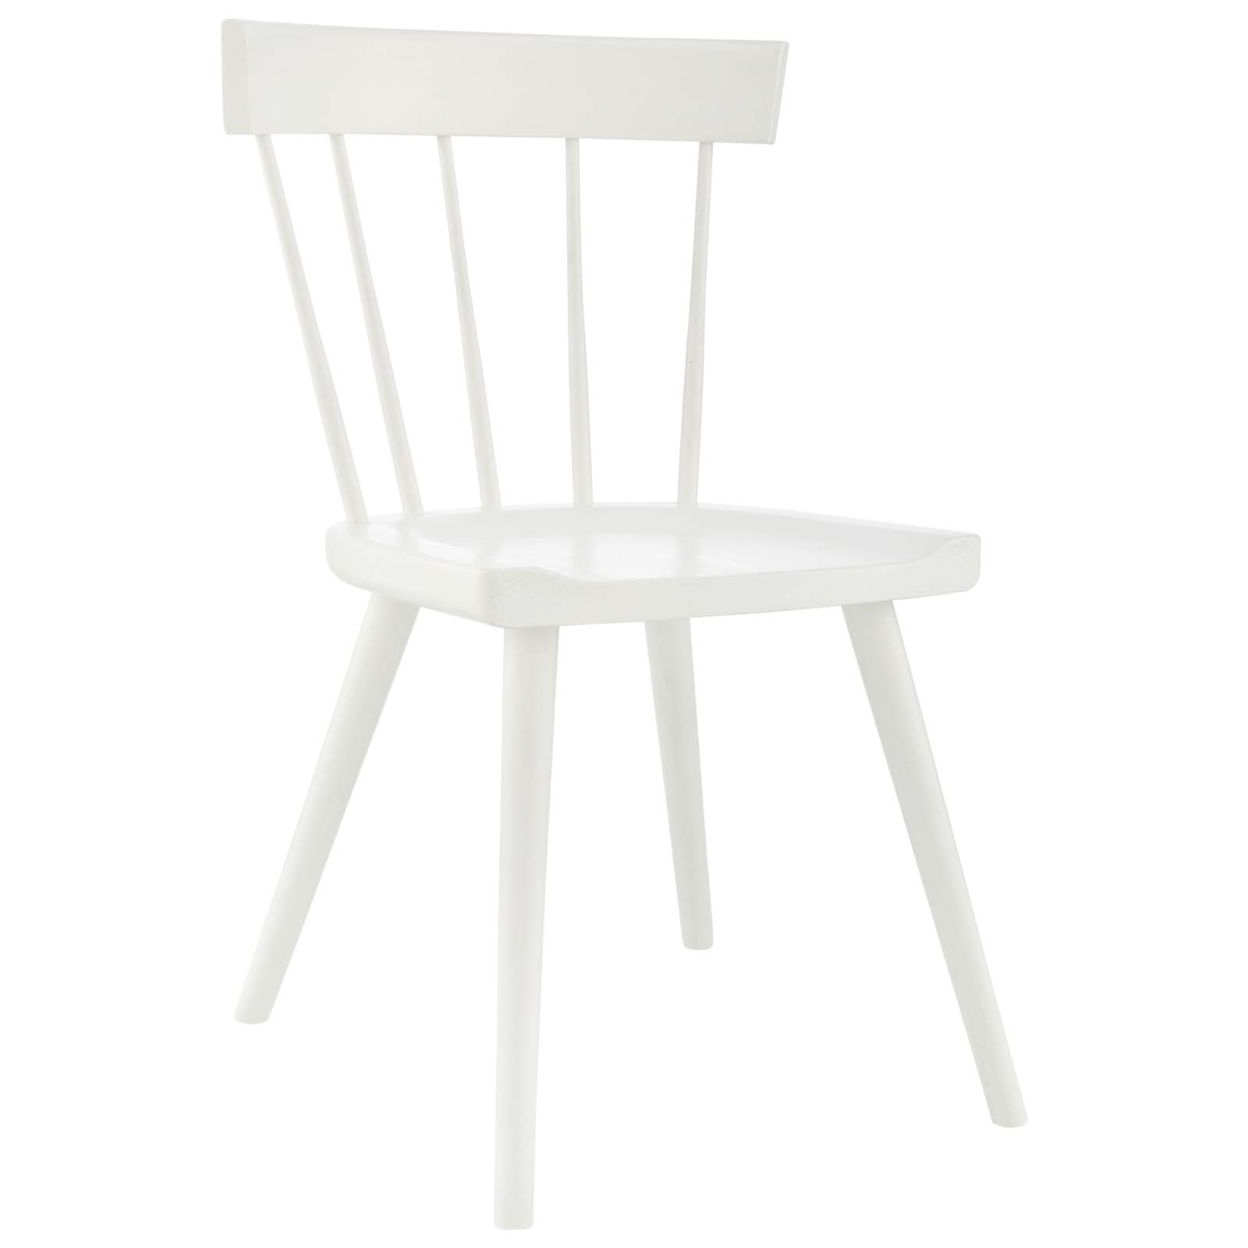 Sutter Wood Dining Side Chair, White